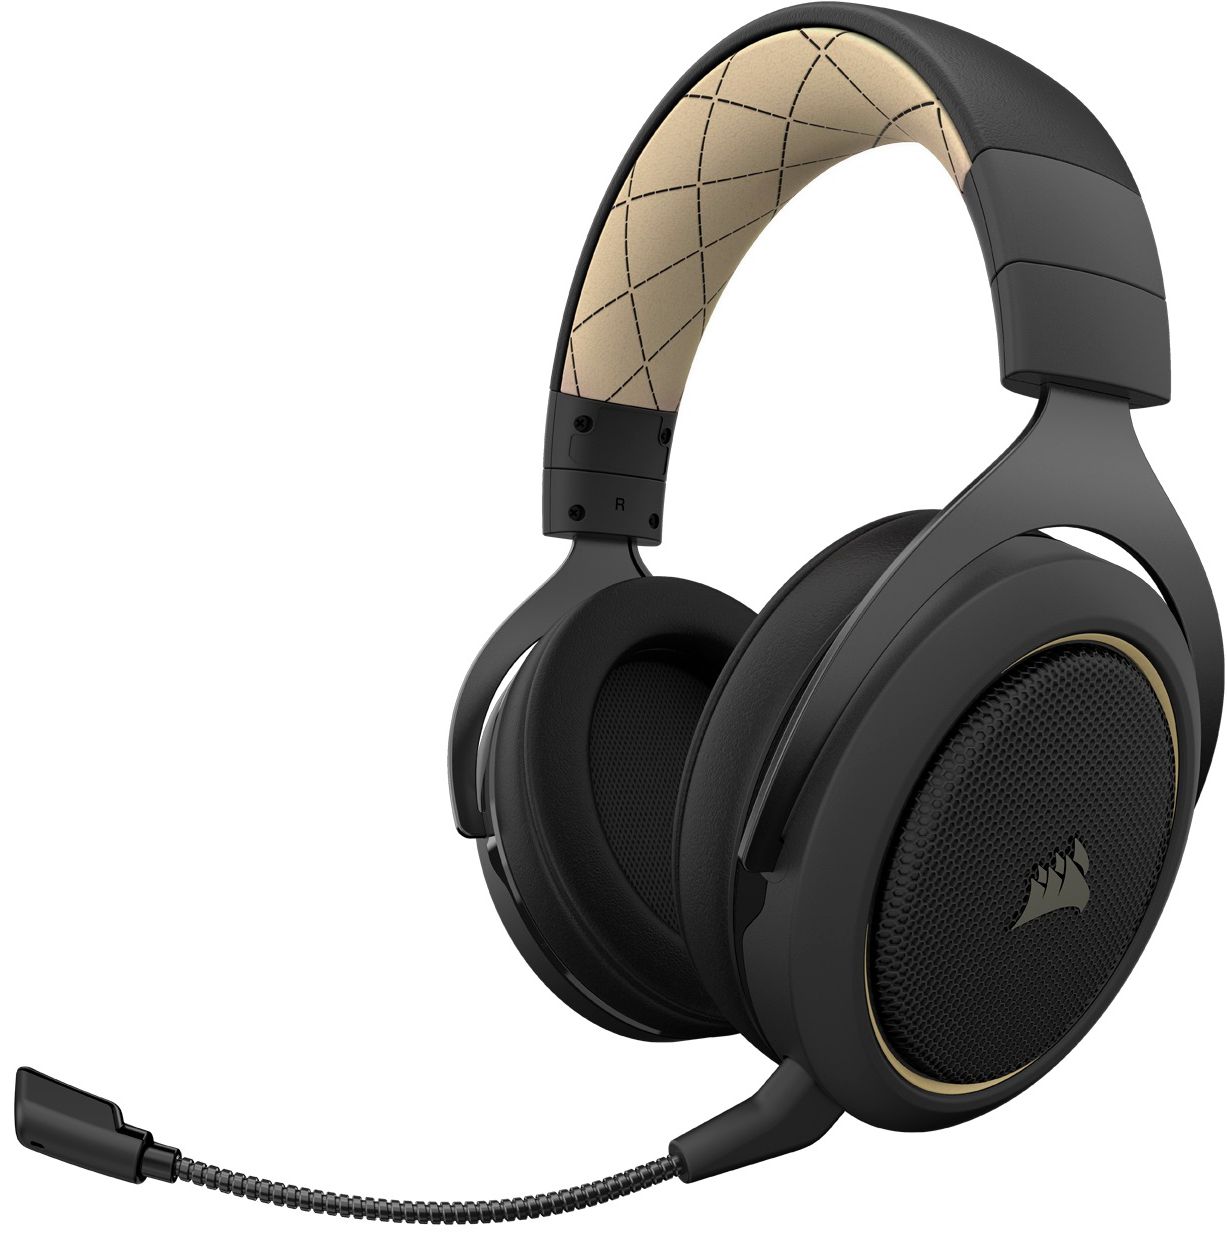 Angle View: SteelSeries - Arctis 5 Wired DTS Headphone Gaming Headset for PC, PS5, and PS4 - Black